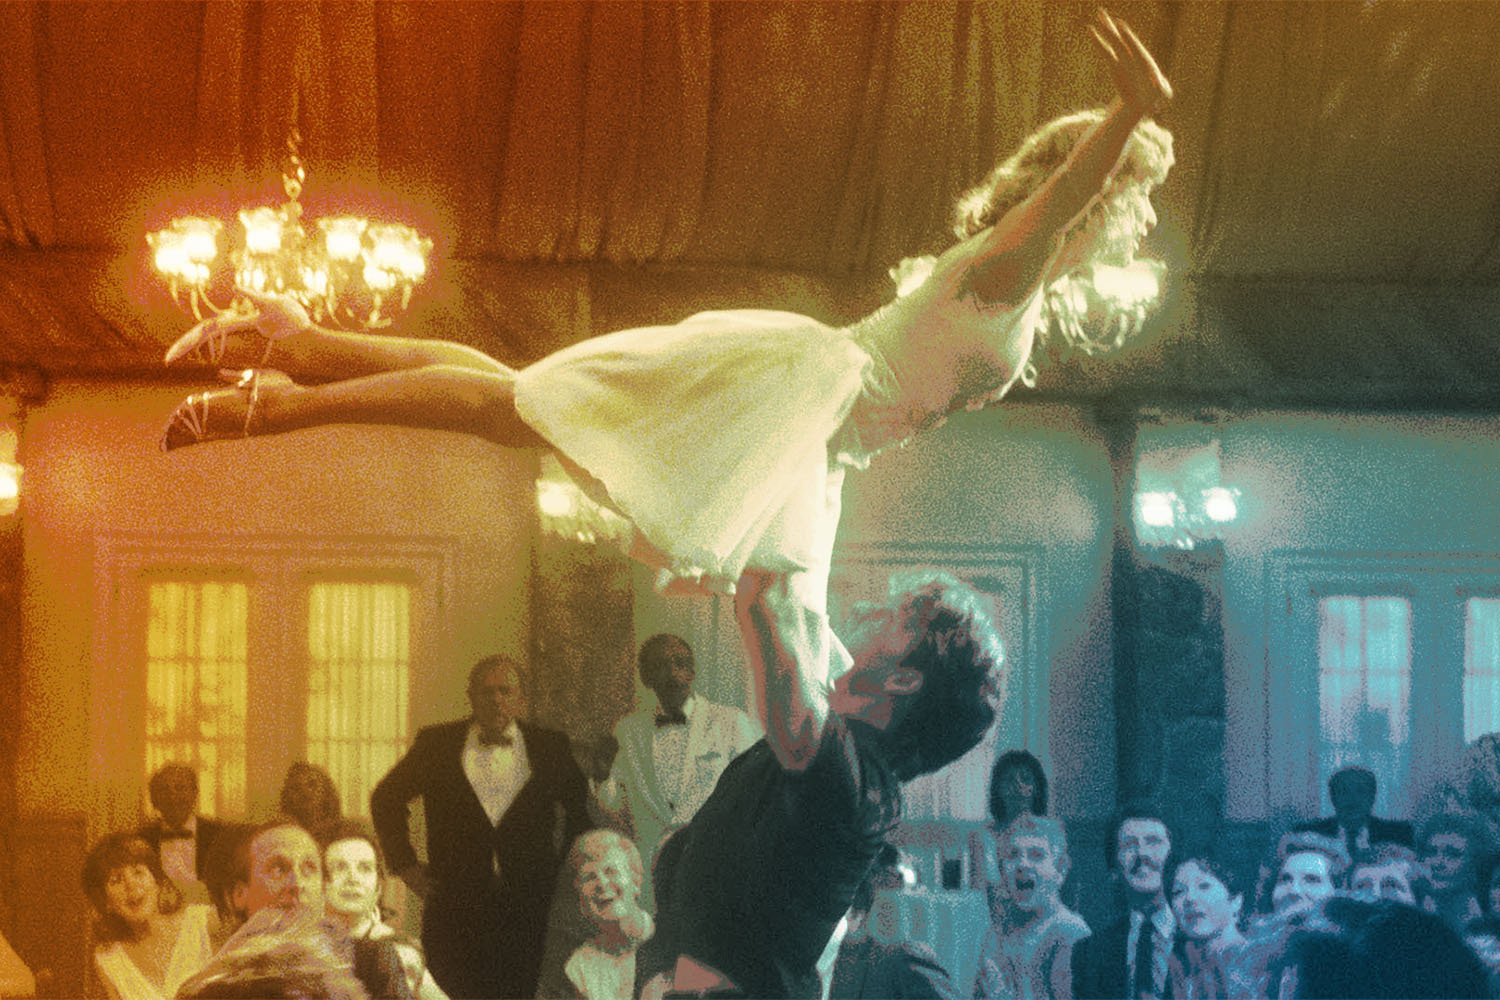 Jennifer Grey and Patrick Swayze in the famous dance climax of "Dirty Dancing", now celebrating its 35th anniversary